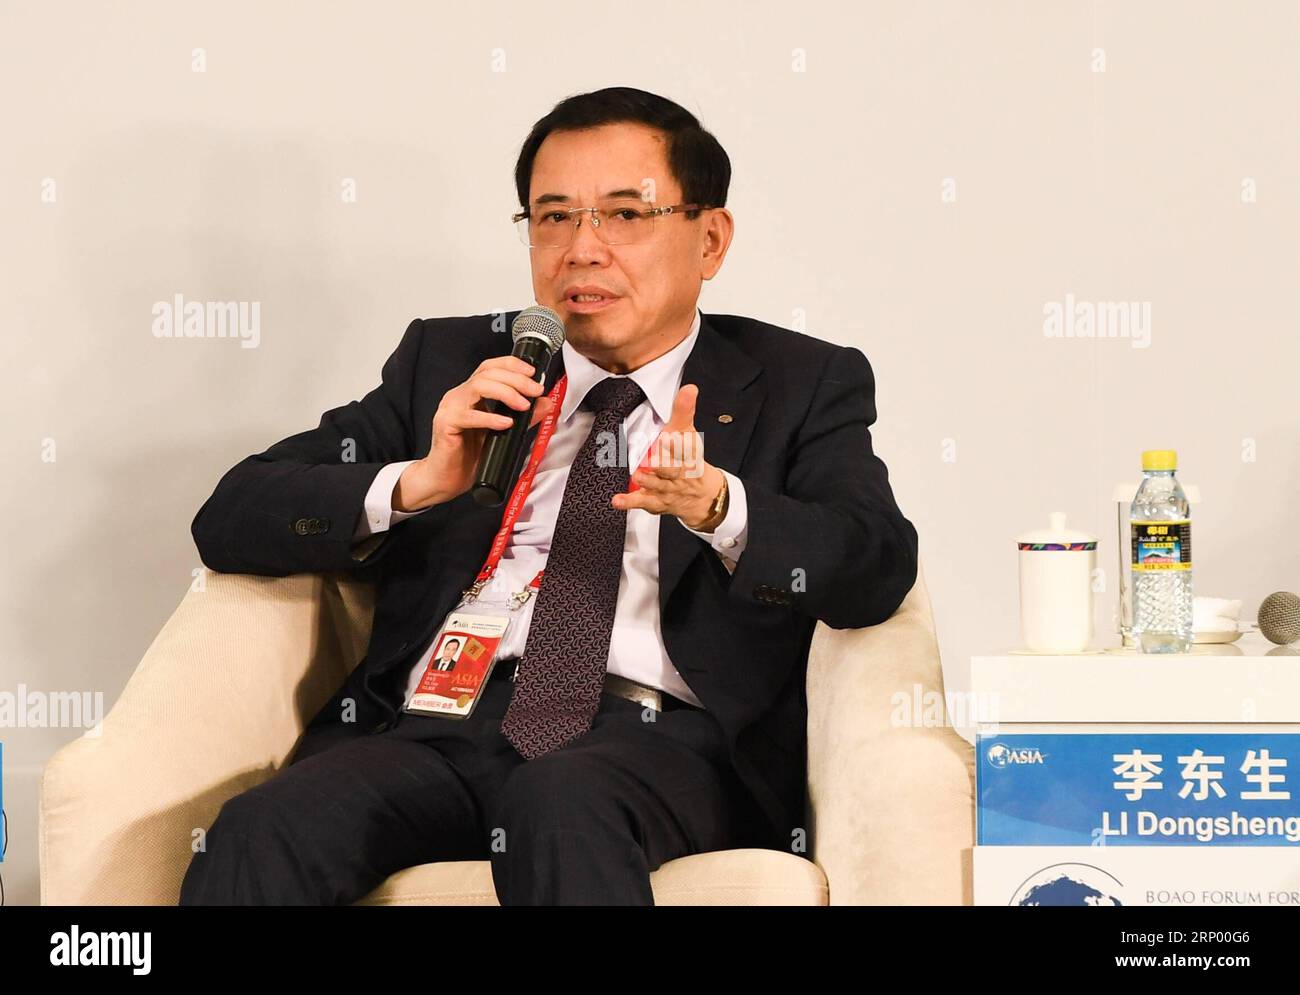 (180411) -- BOAO, April 11,2018 -- Li Dongsheng, chairman and CEO of TCL Cooperation, speaks at the session of The New Reform Agenda: Government vs the Market during the Boao Forum for Asia Annual Conference 2018 in Boao, south China s Hainan Province, April 11, 2018. ) (wyl) CHINA-BOAO FORUM FOR ASIA-GOVERNMENT VS MARKET (CN) YangxGuanyu PUBLICATIONxNOTxINxCHN Stock Photo